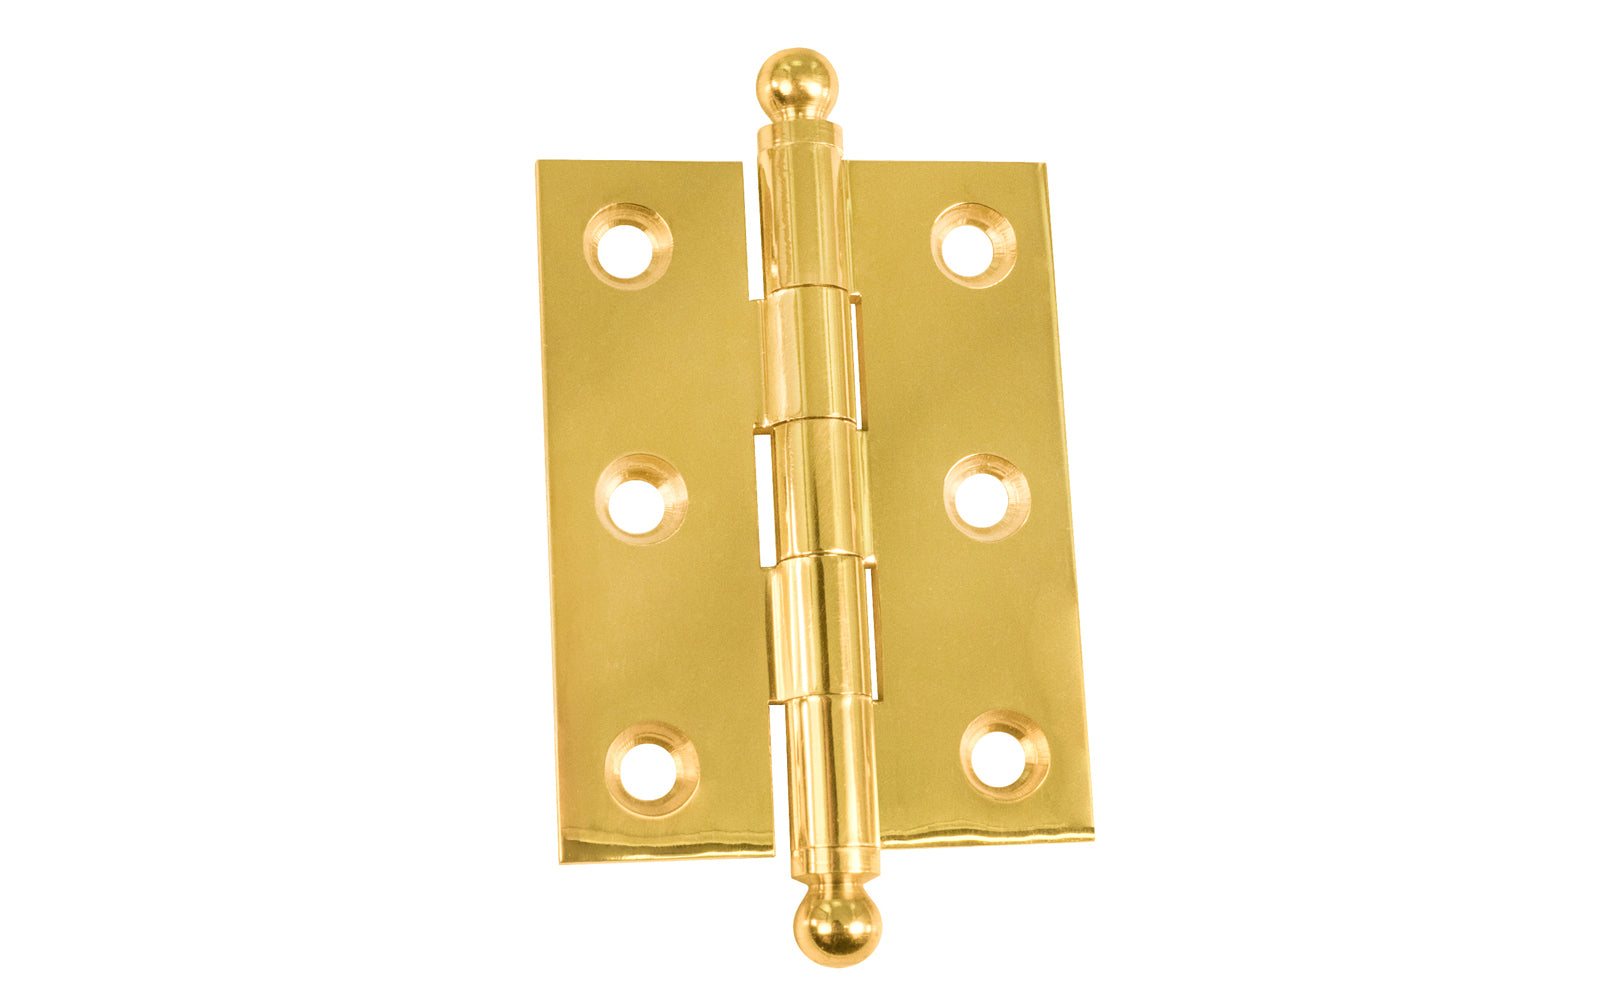 Classic Solid Brass Ball-Tip Cabinet Hinge ~ 2" x 1-1/2". Full mortise extruded hinges. 3/32" heavy duty leaf thickness gauge. Non-removable fixed hinge pin with ball tips. High quality thick cabinet hinge with ball tips. Unlacquered brass (will patina over time). Un-lacquered brass. Non-lacquered brass. 